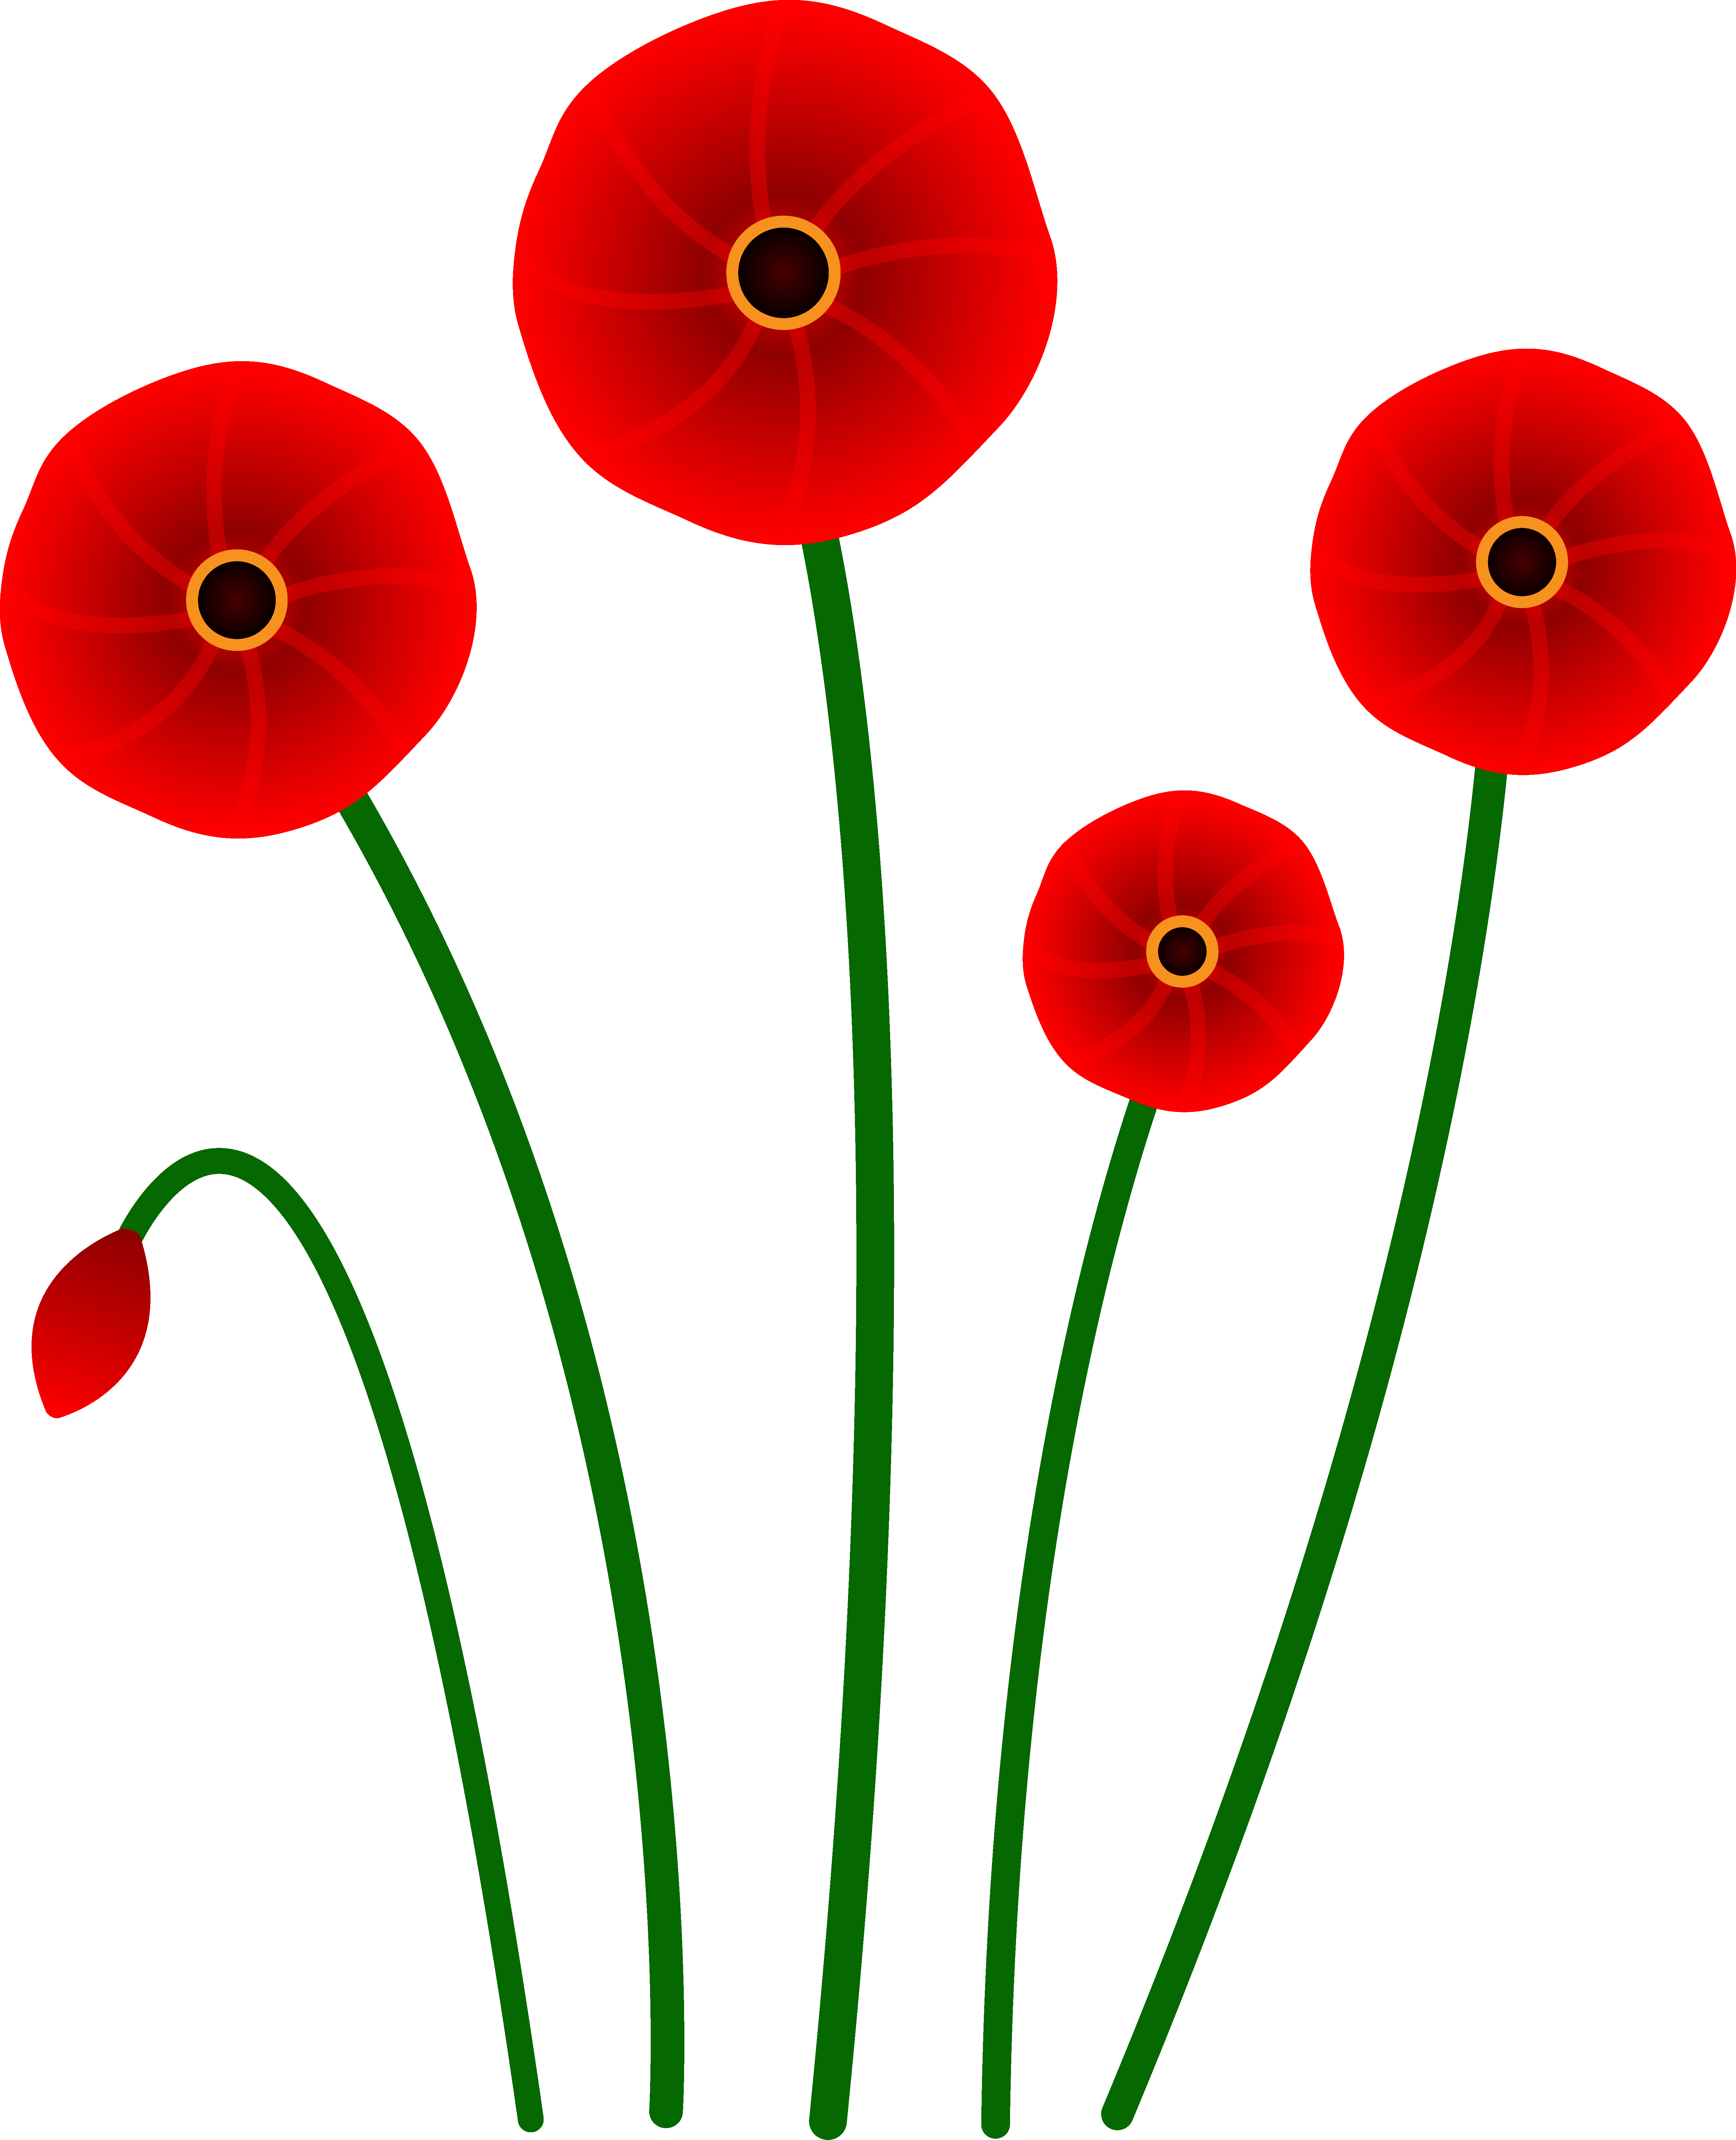 Flower Stem Clipart | Free download on ClipArtMag